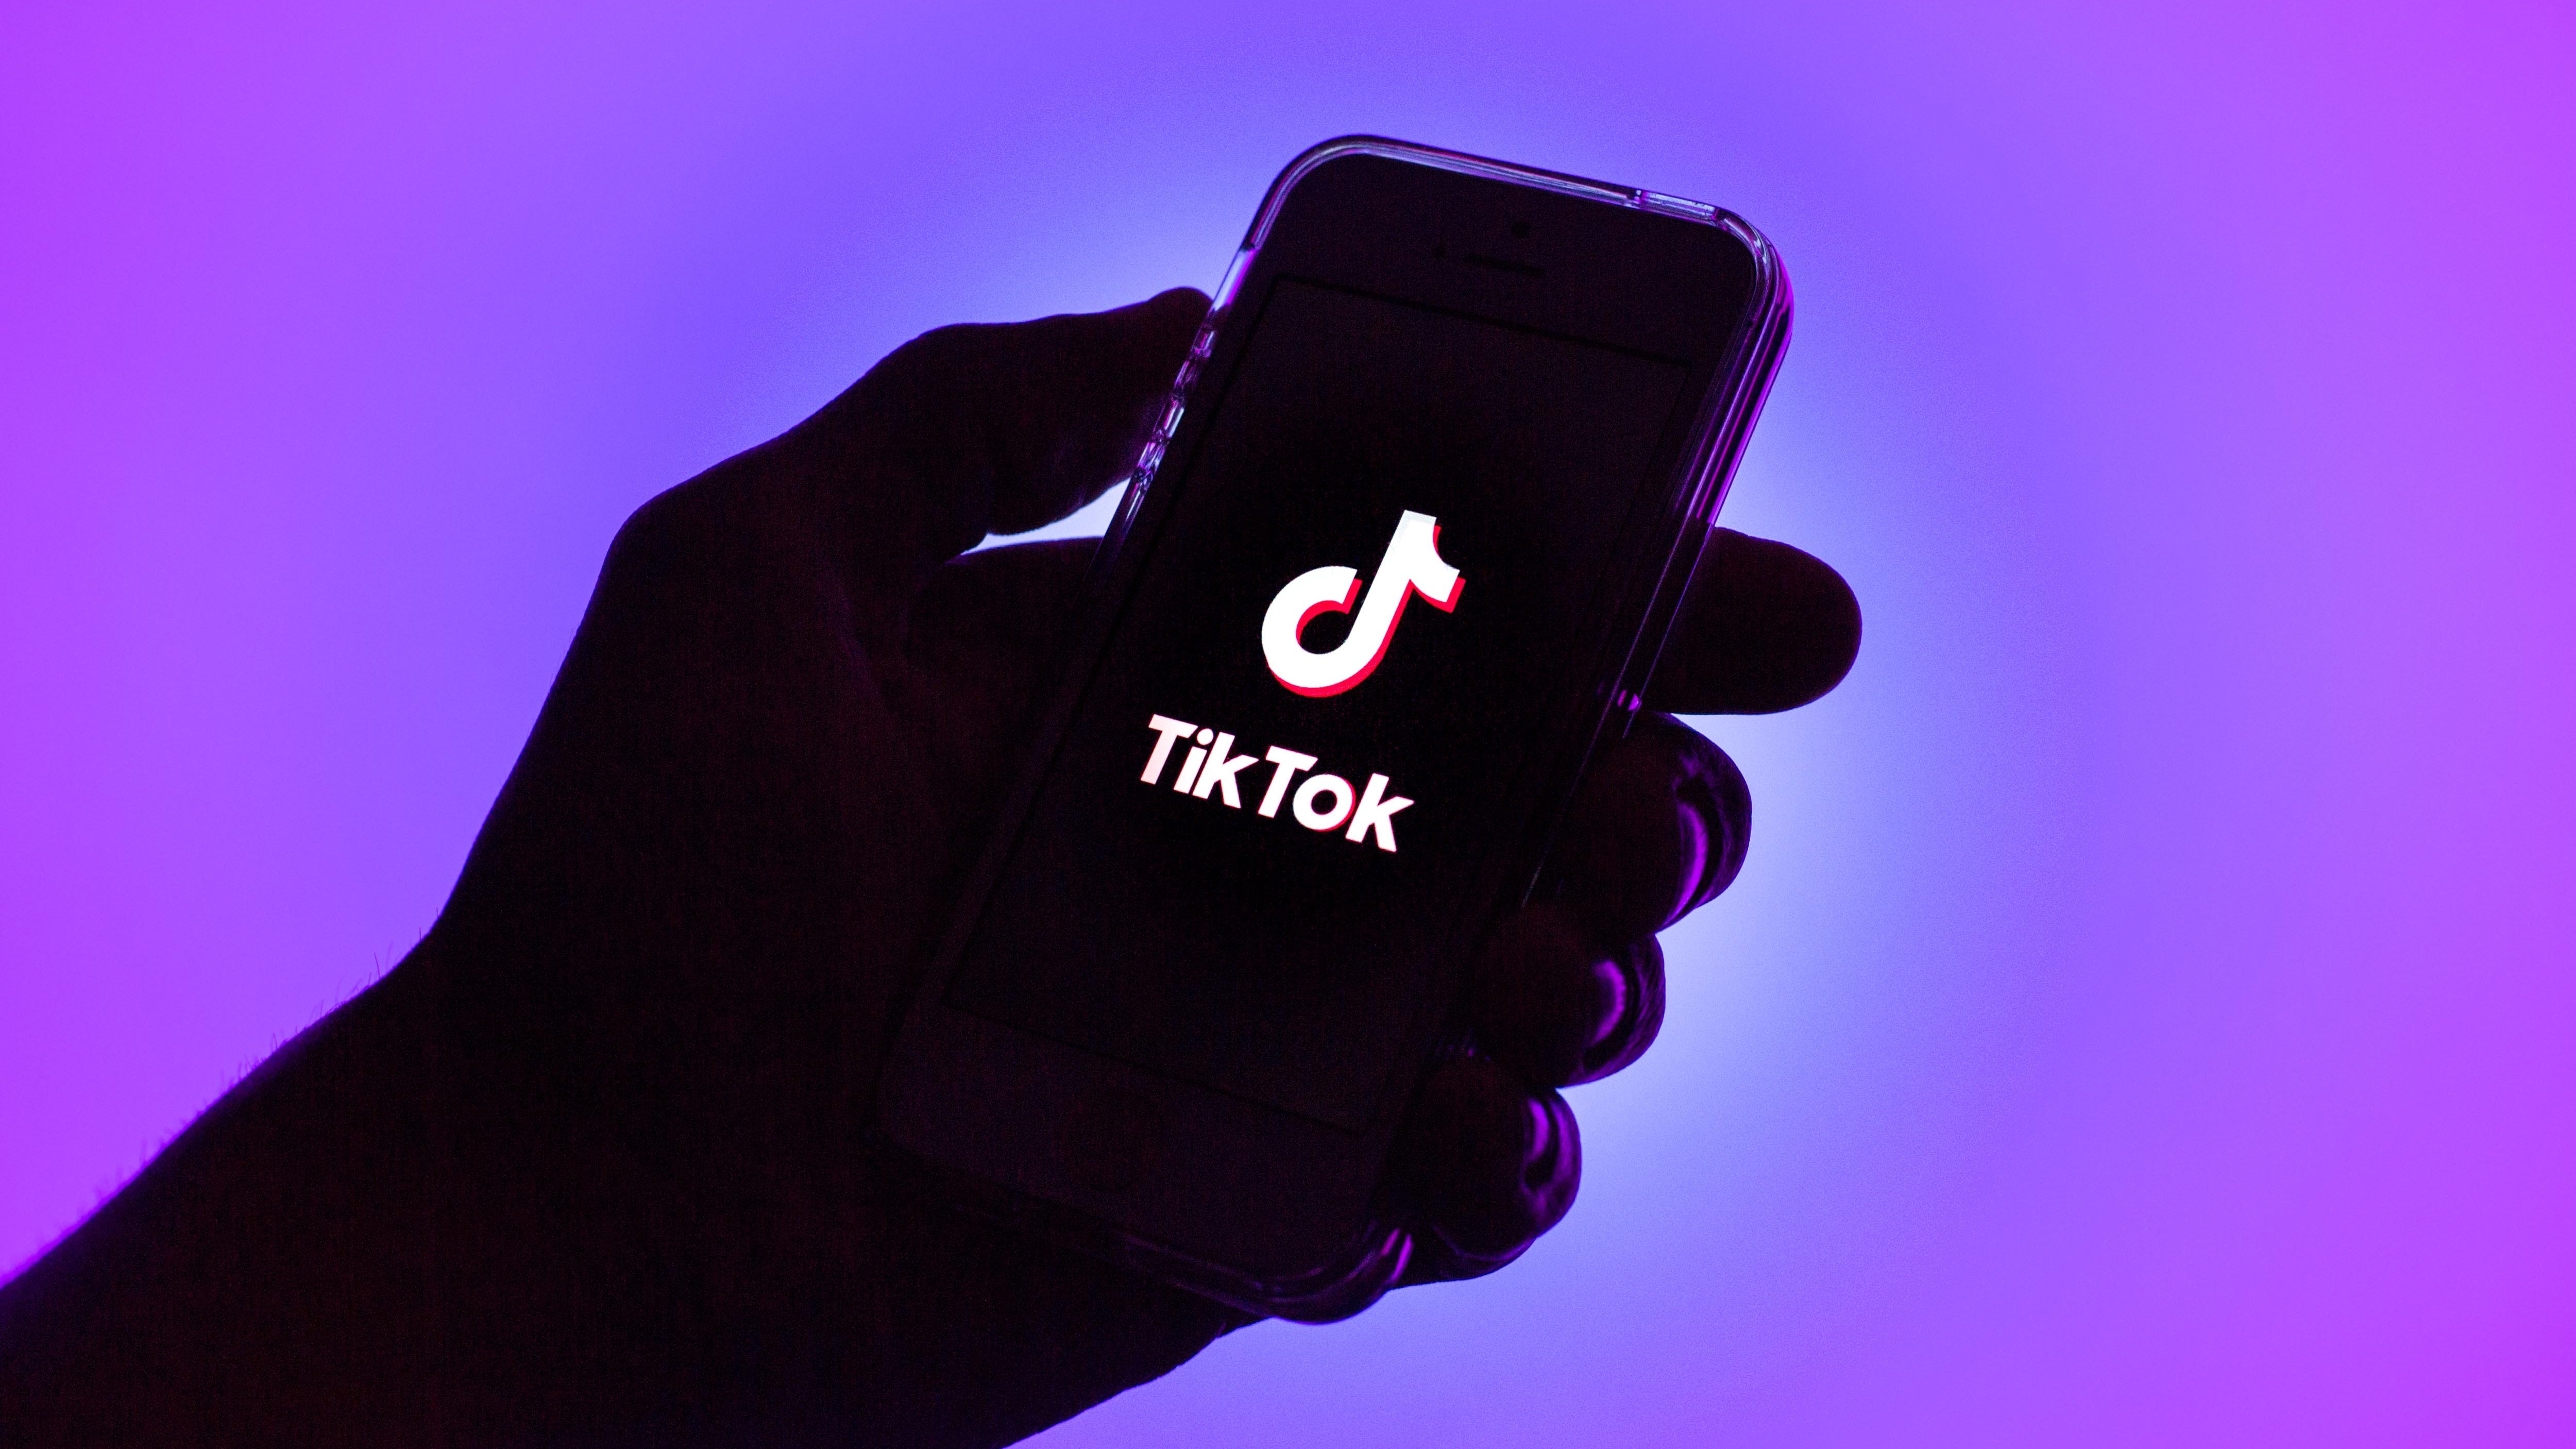 After dominating the short-video market, TikTok may be considering a music service | TechCrunch